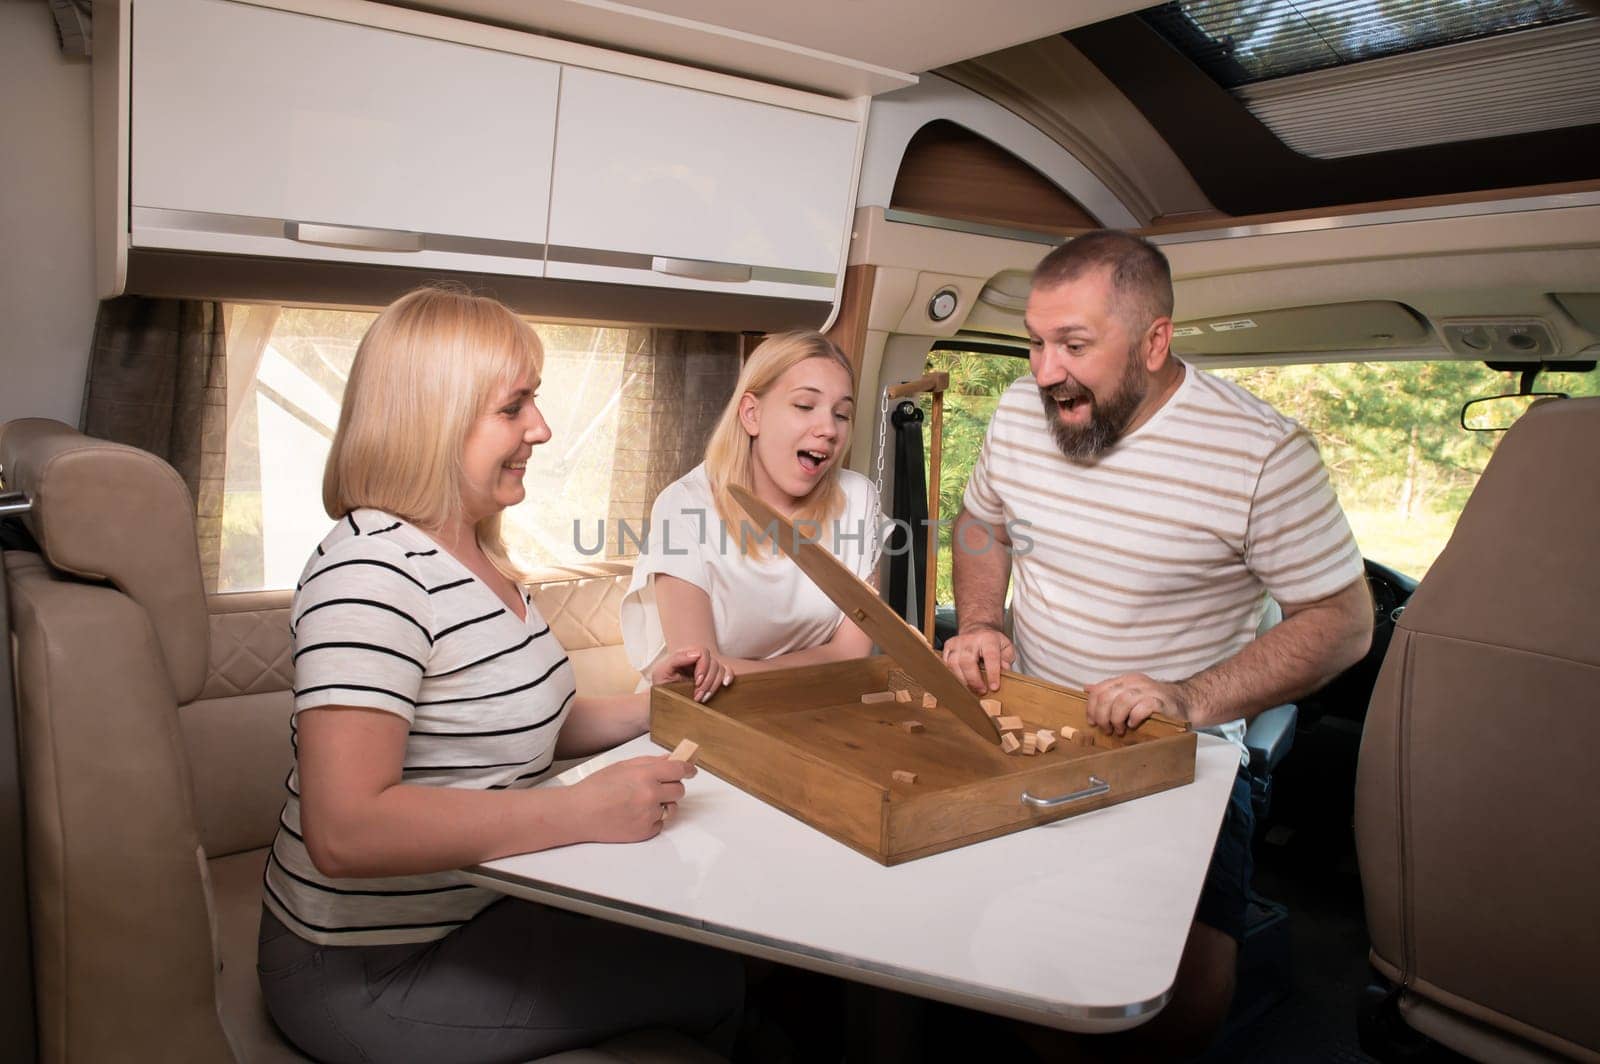 A family of three is playing a board game while sitting in a motorhome.